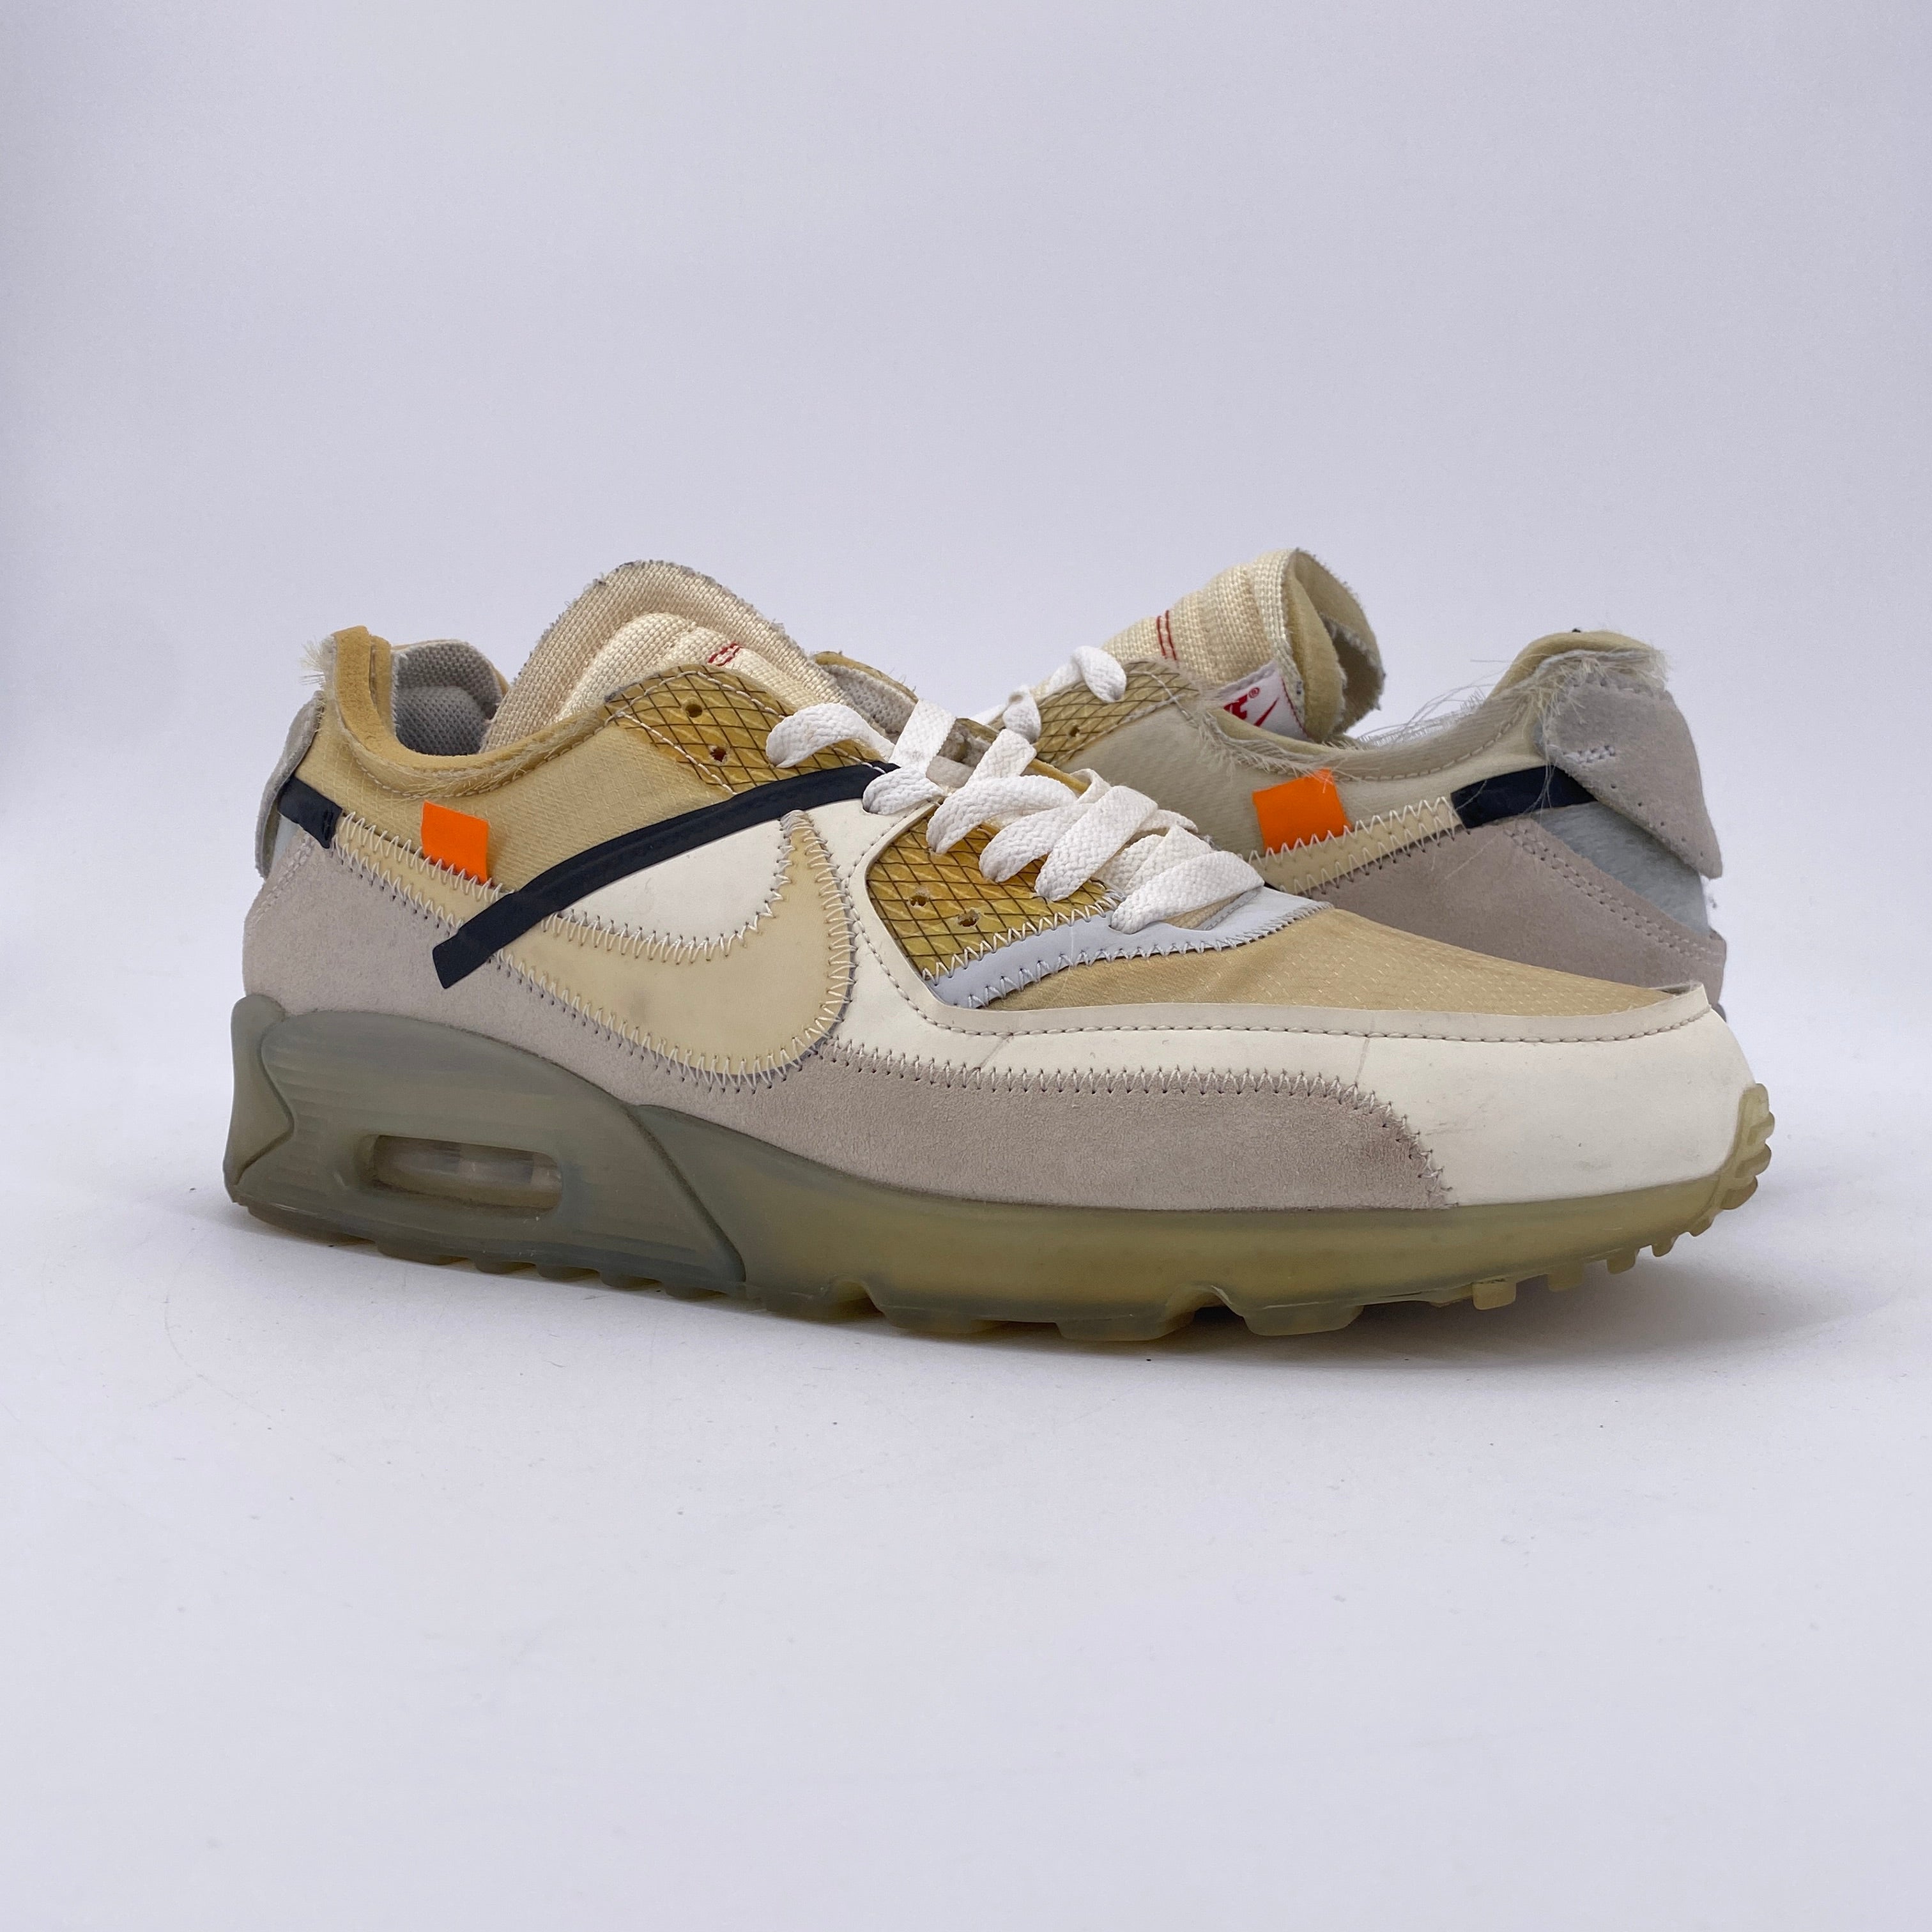 Nike Air Max 90 / OW &quot;THE 10: OFF-WHITE&quot; 2017 Used Size 10.5